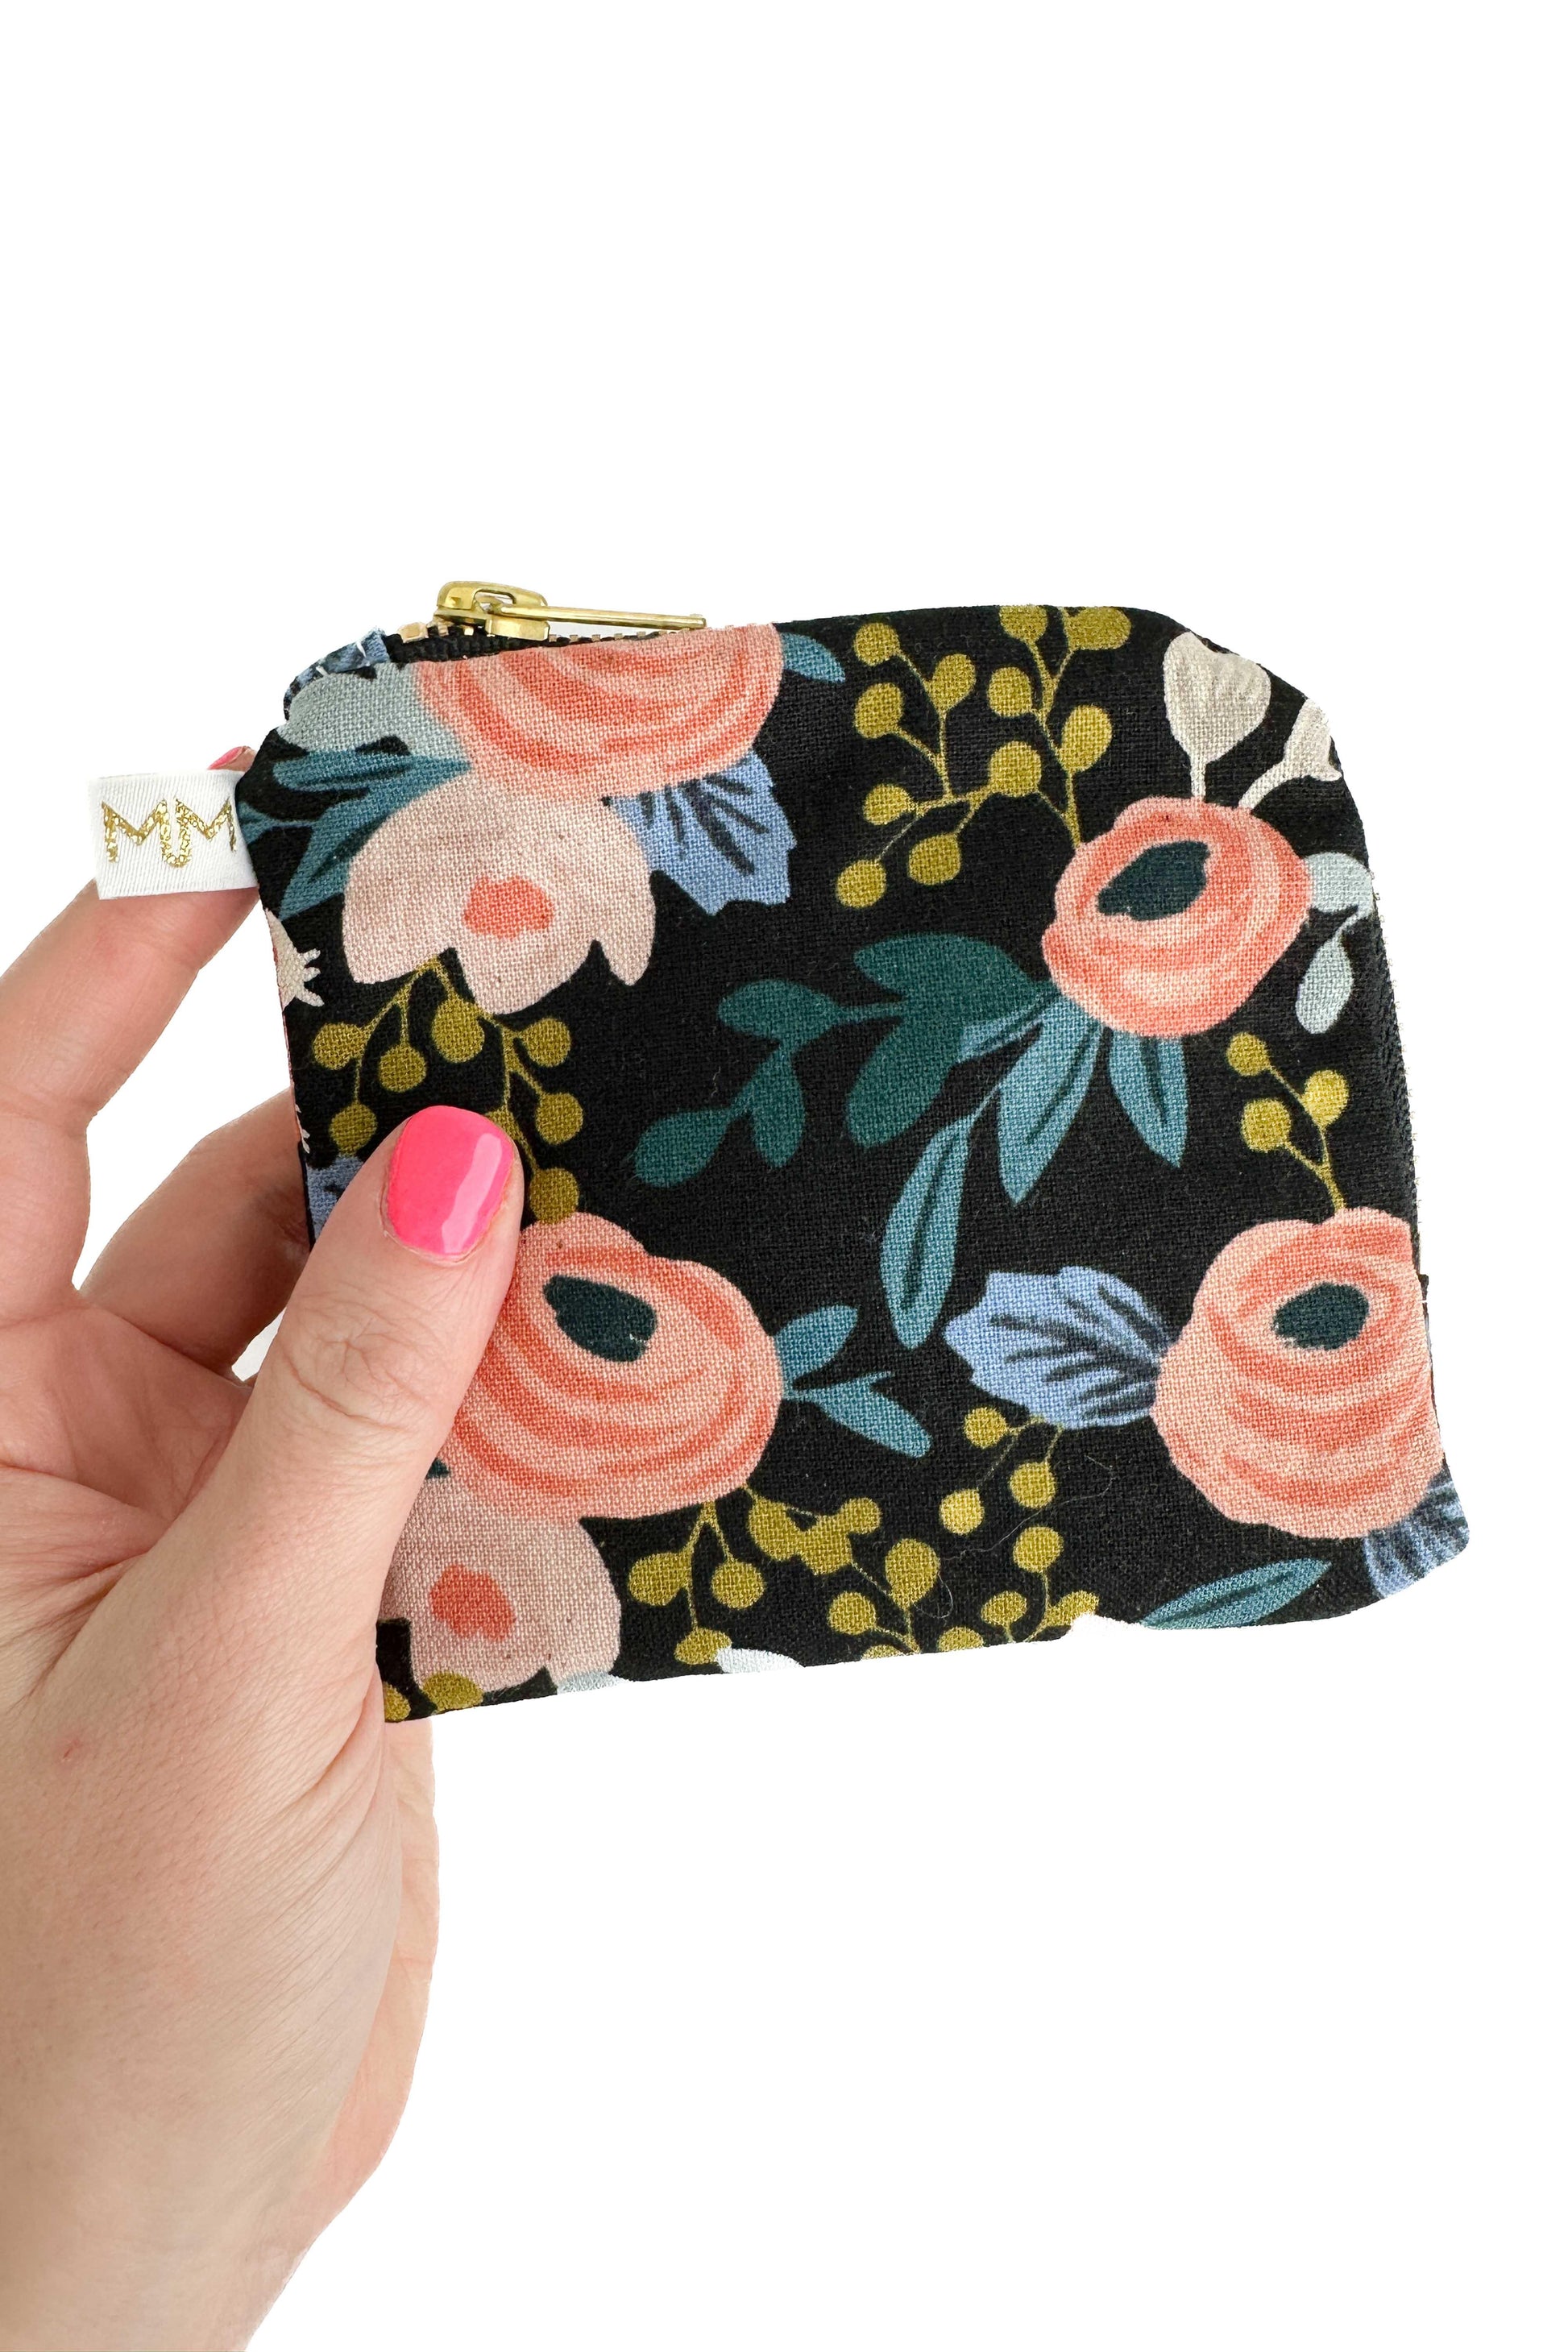 Midnight Garden Mini Travel Bag with Compartments READY TO SHIP - Modern Makerie